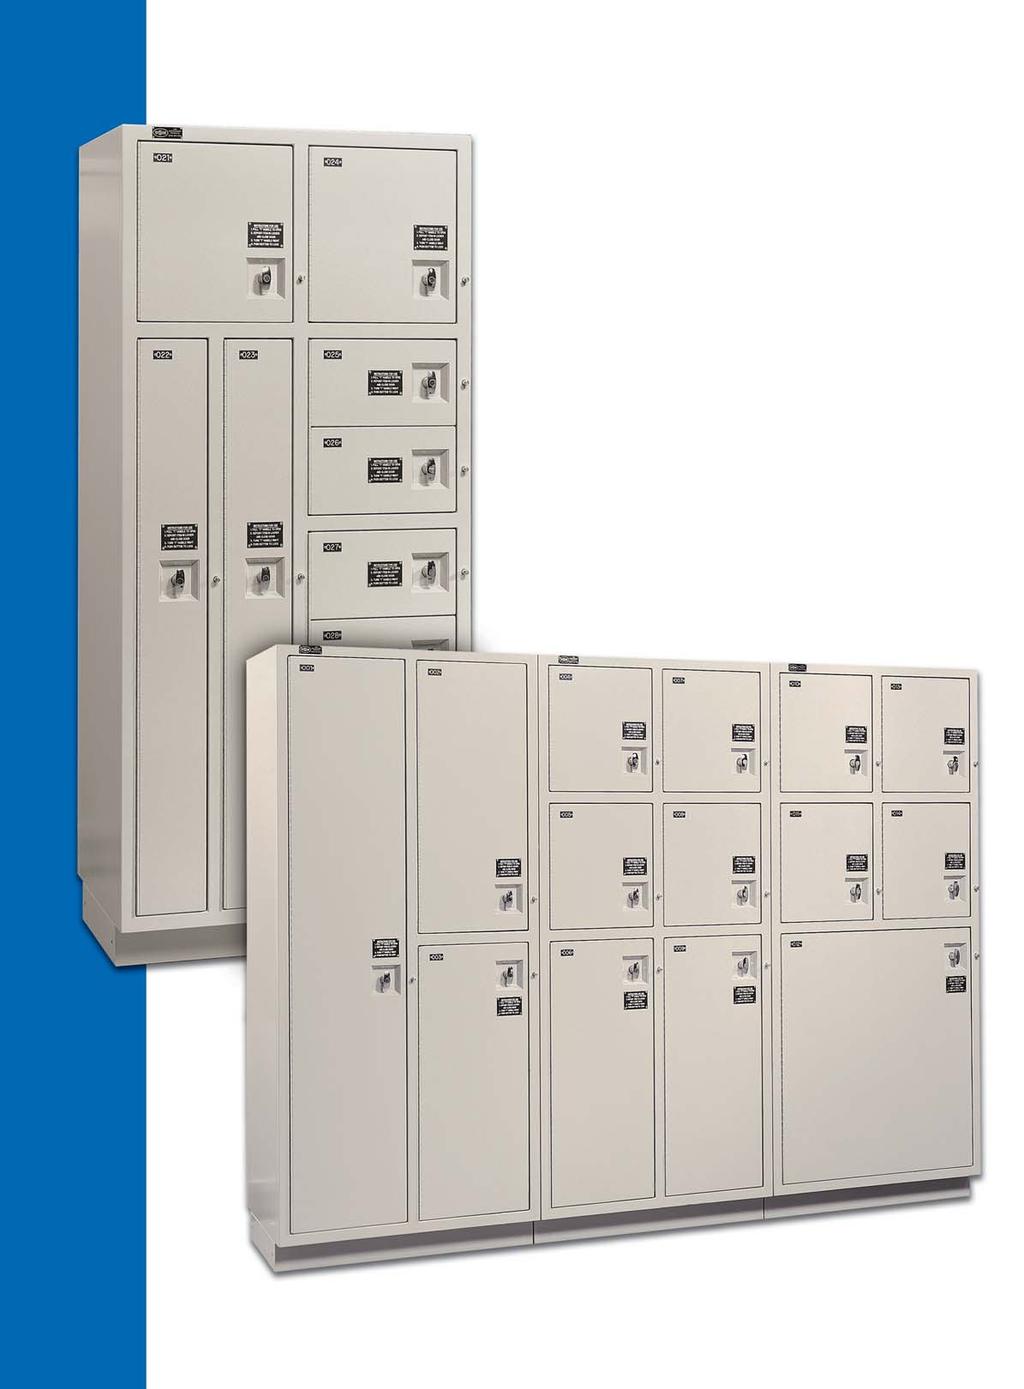 Standard Evidence Lockers Features Fully assembled and ready for use No Key or combination needed for evidence deposit Available in Pass-thru or Non Pass-thru Recessed chrome